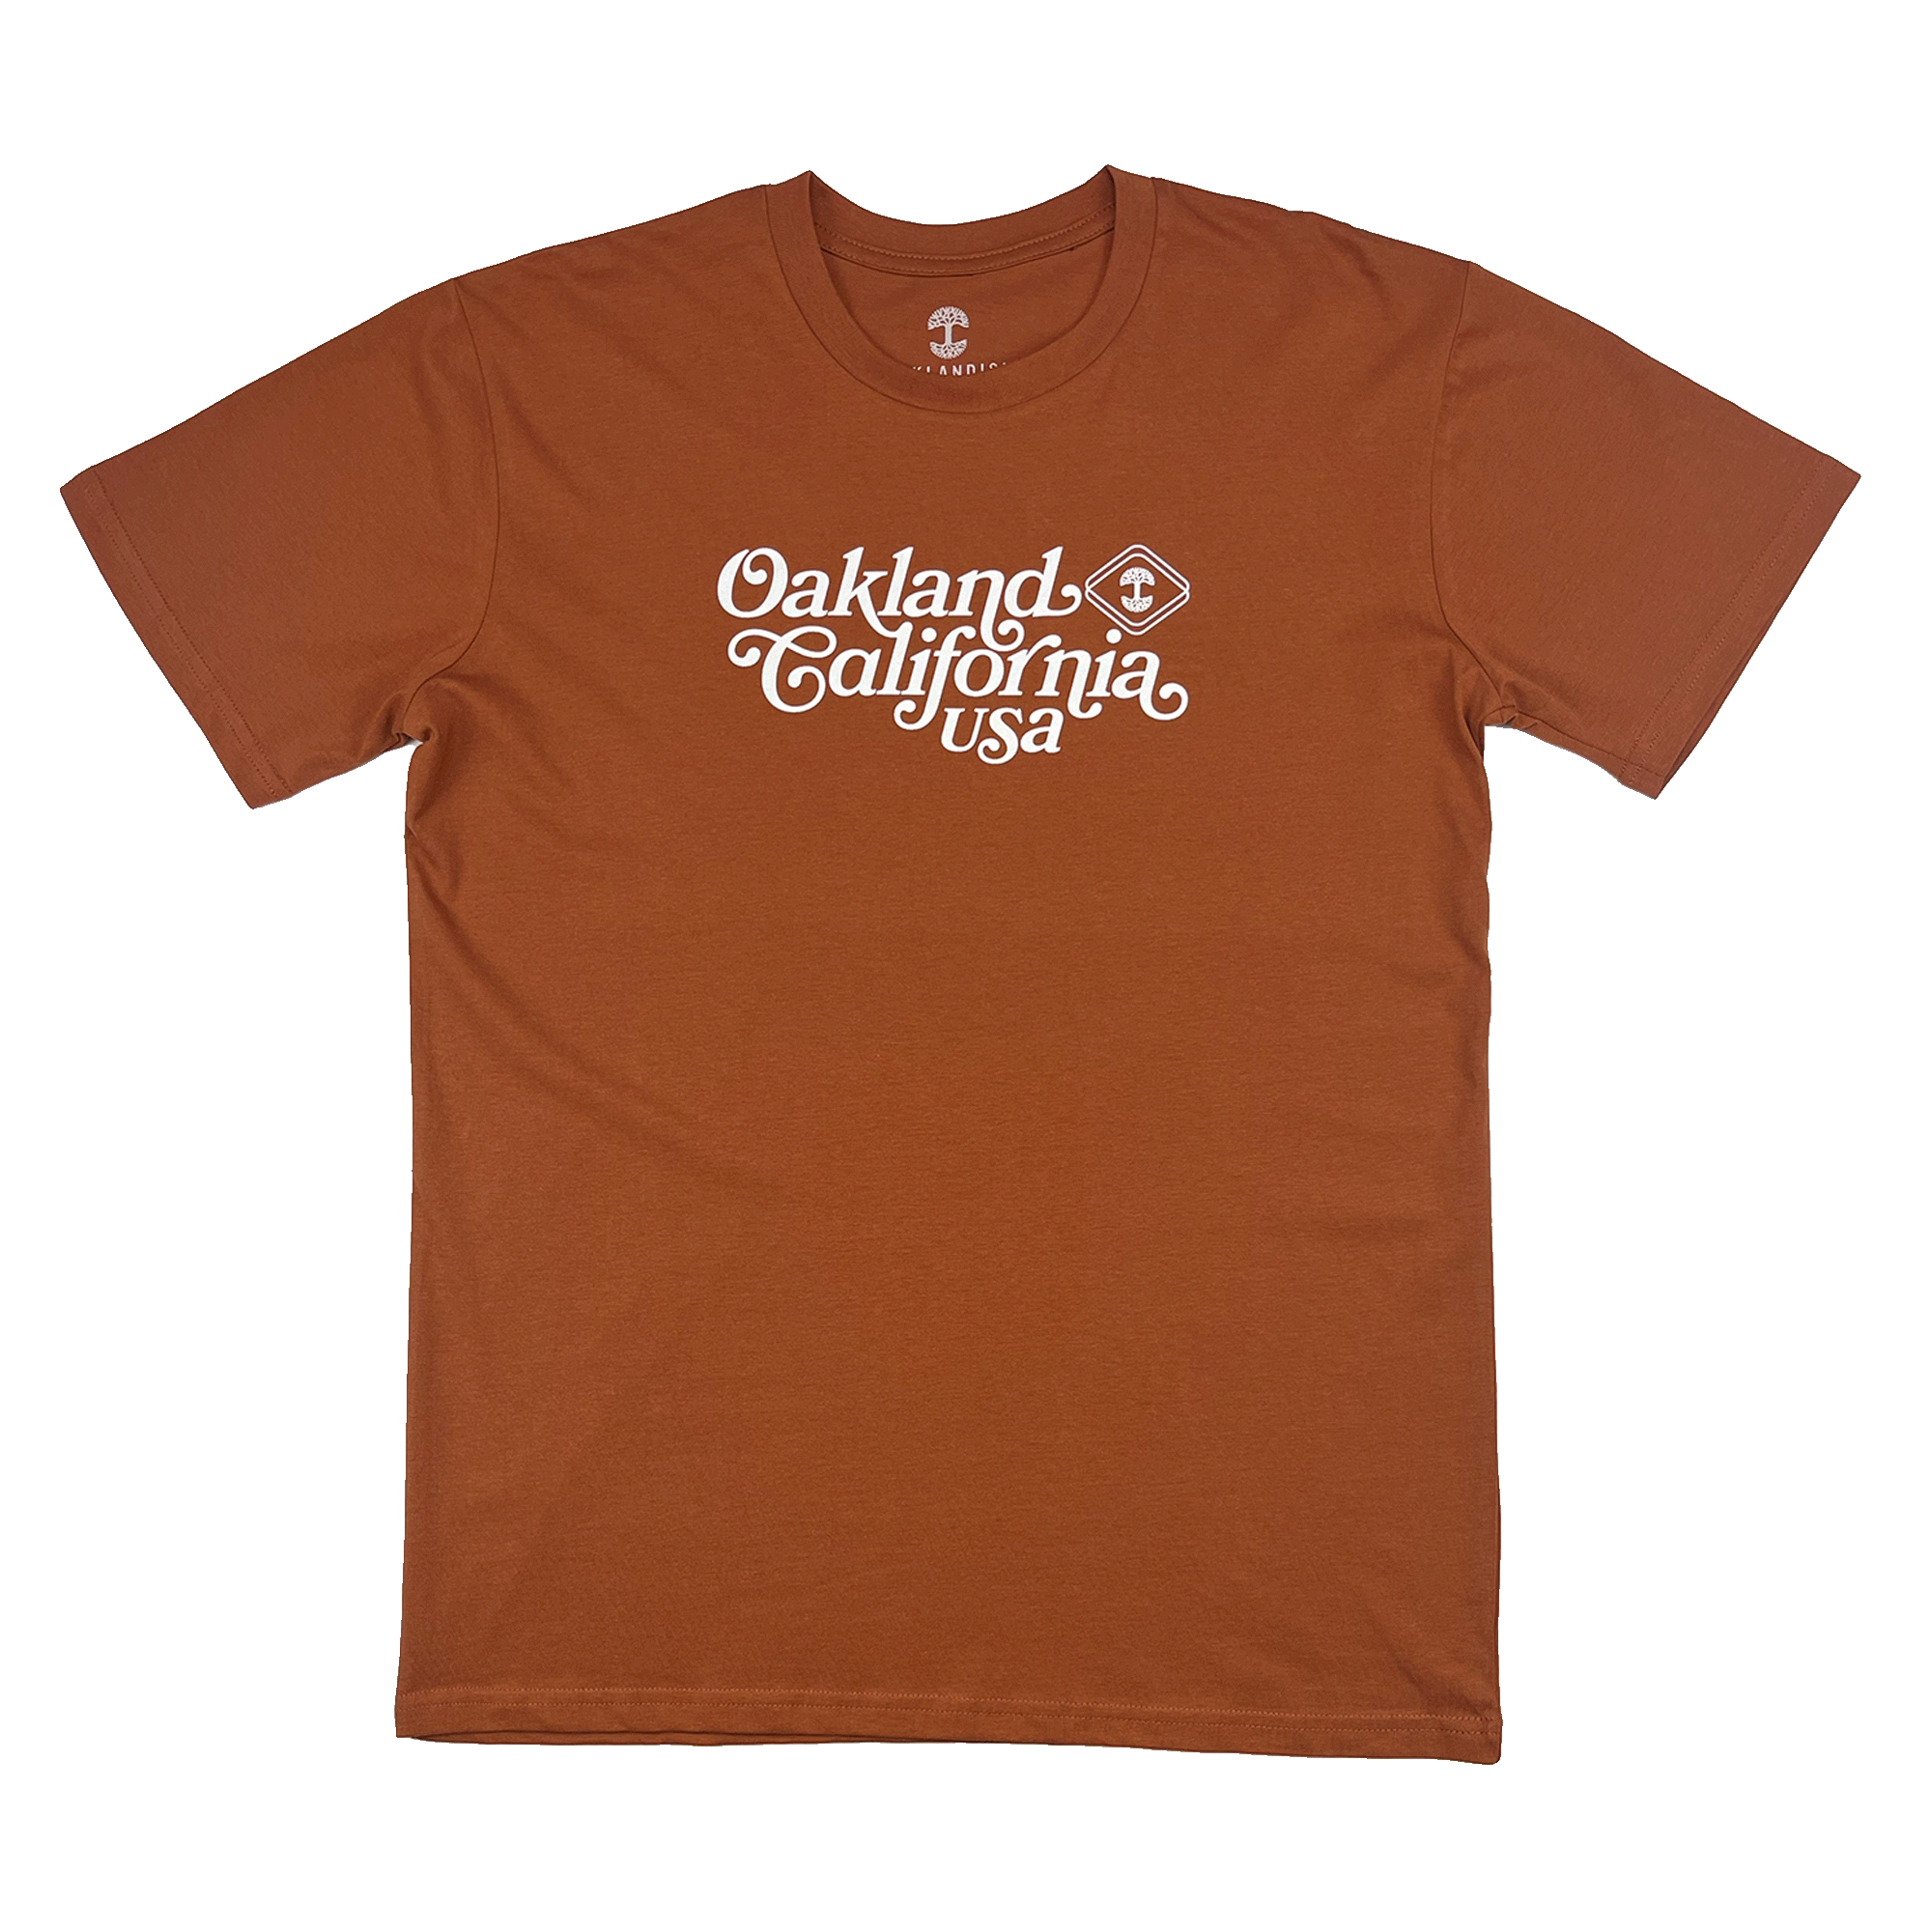 Clay red t-shirt with white Oakland, California, USA graphic in cursive and Oaklandish logo.